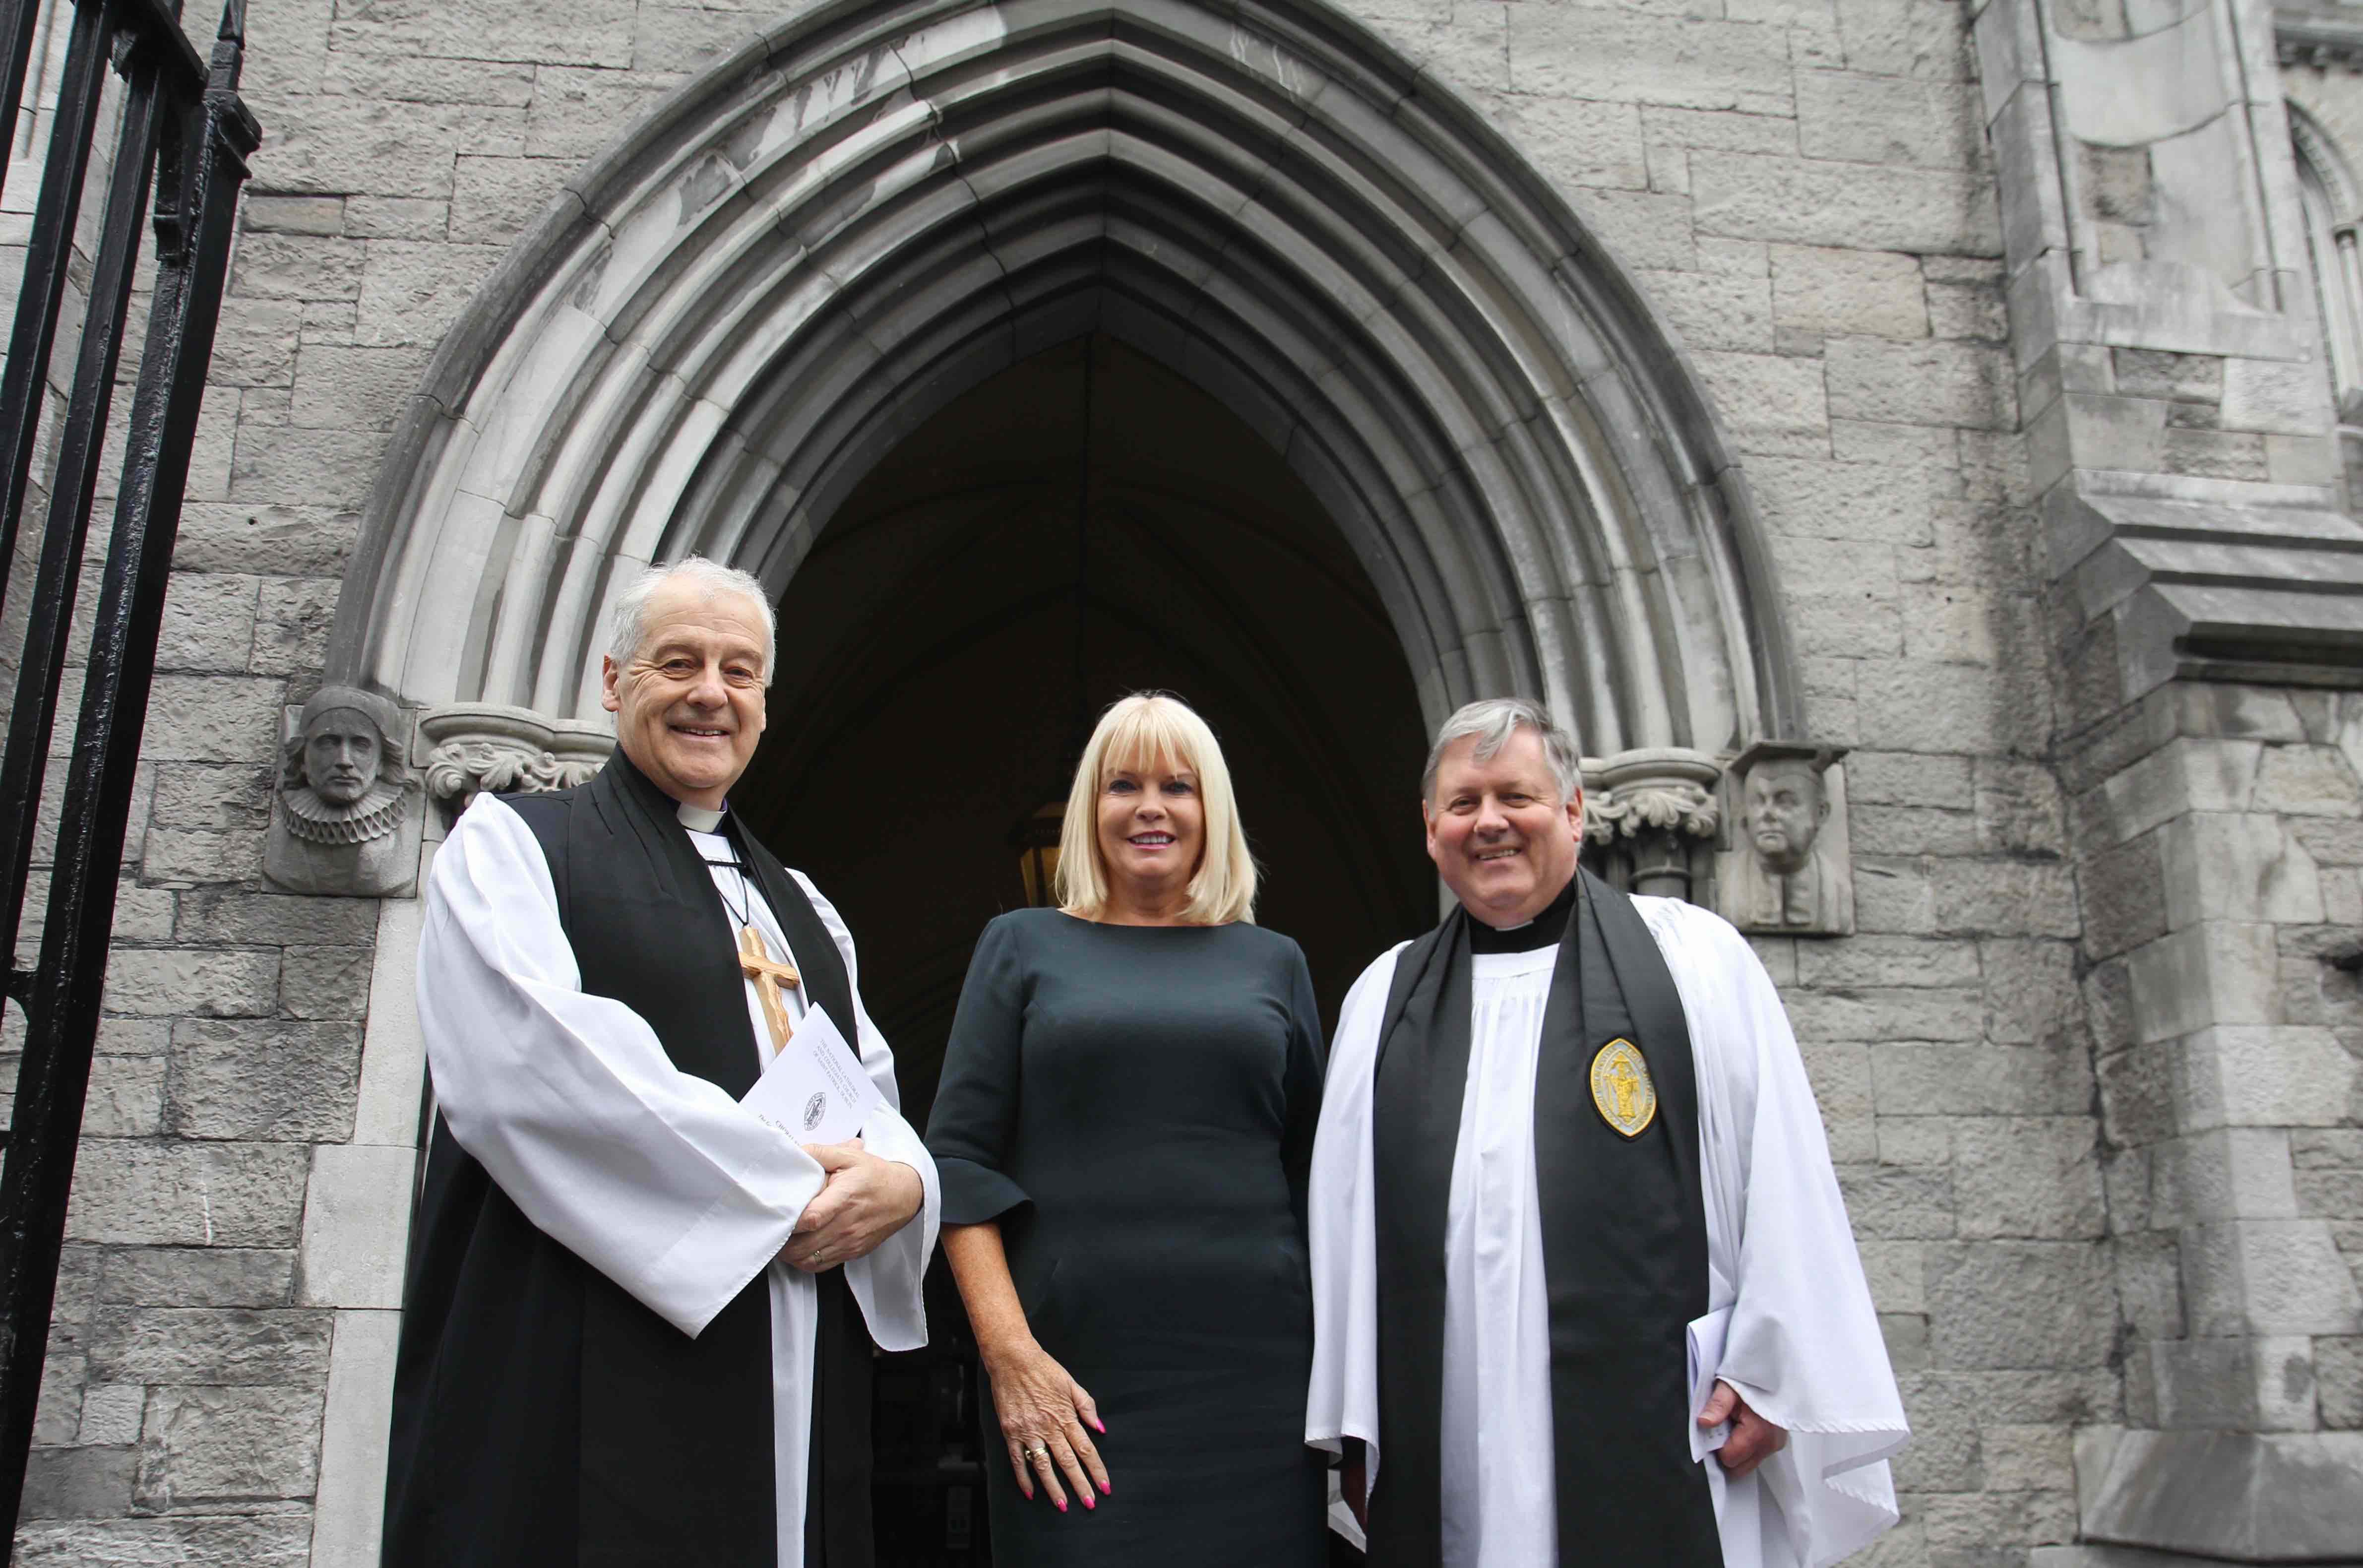 Minister Mary Mitchell O'Connor with Archbishop Michael Jackson and Dean William Morton at the Second Level Schools Service in St Patrick's Cathedral.